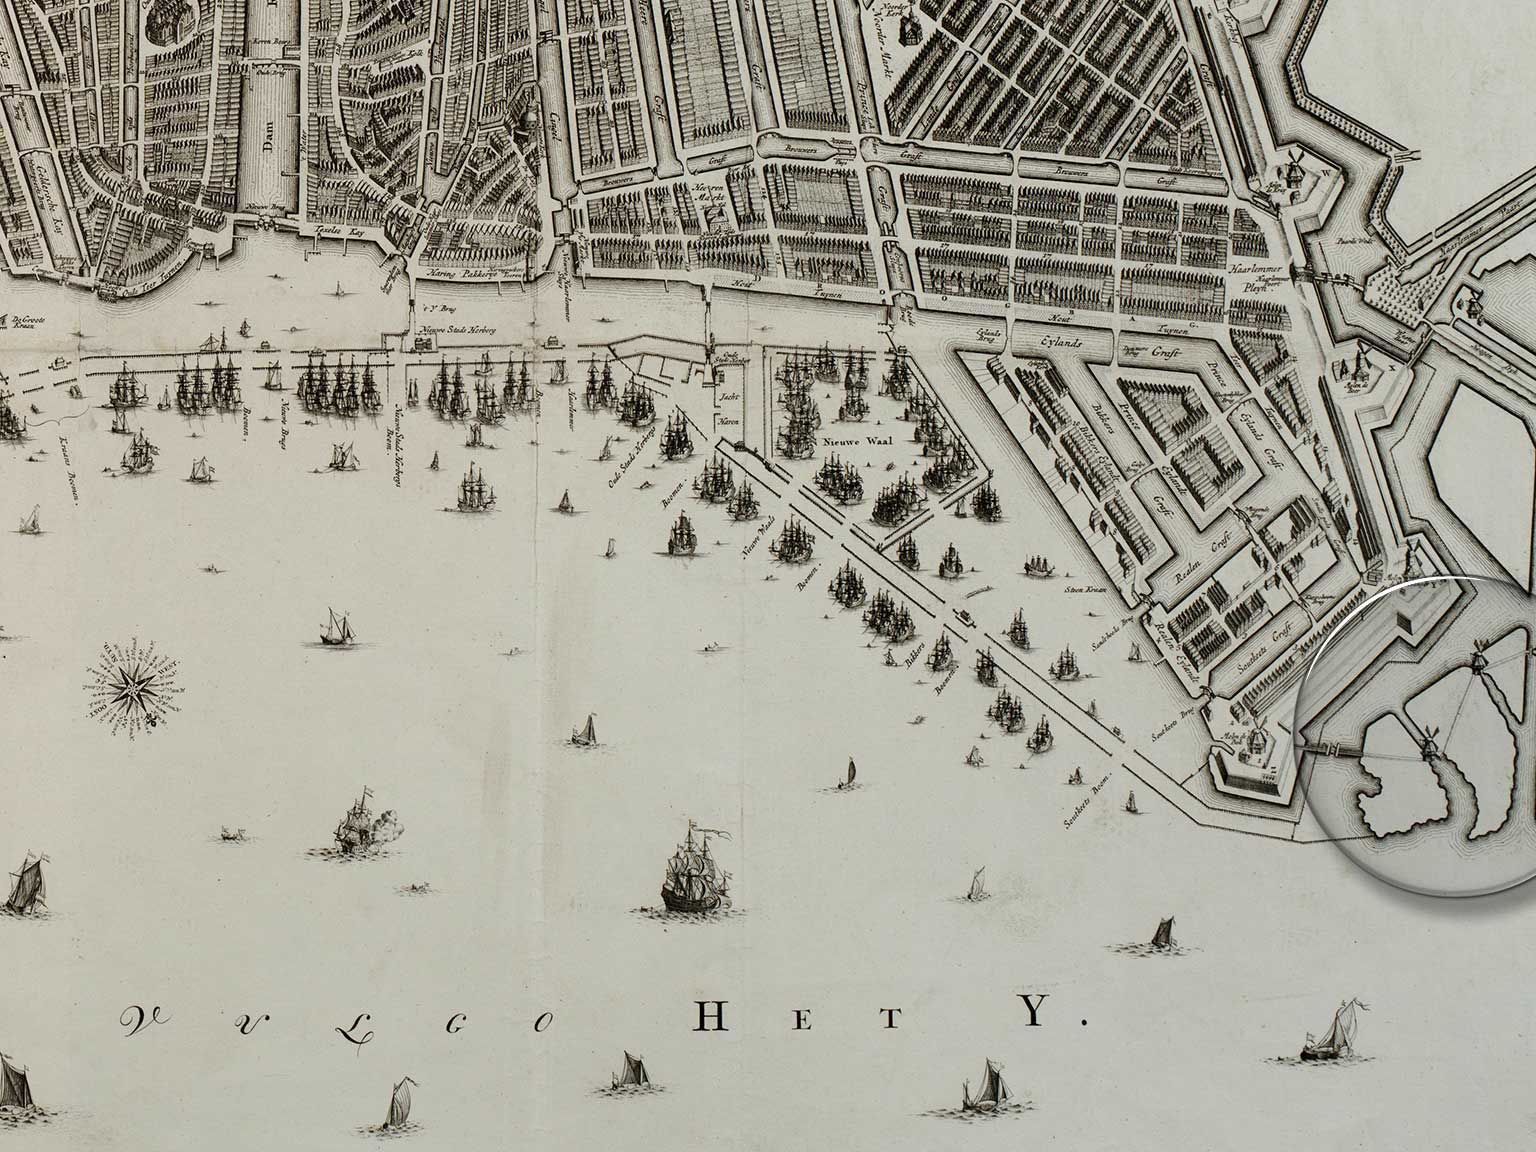 Detail of a map of Amsterdam by Gerrit de Broen from 1737